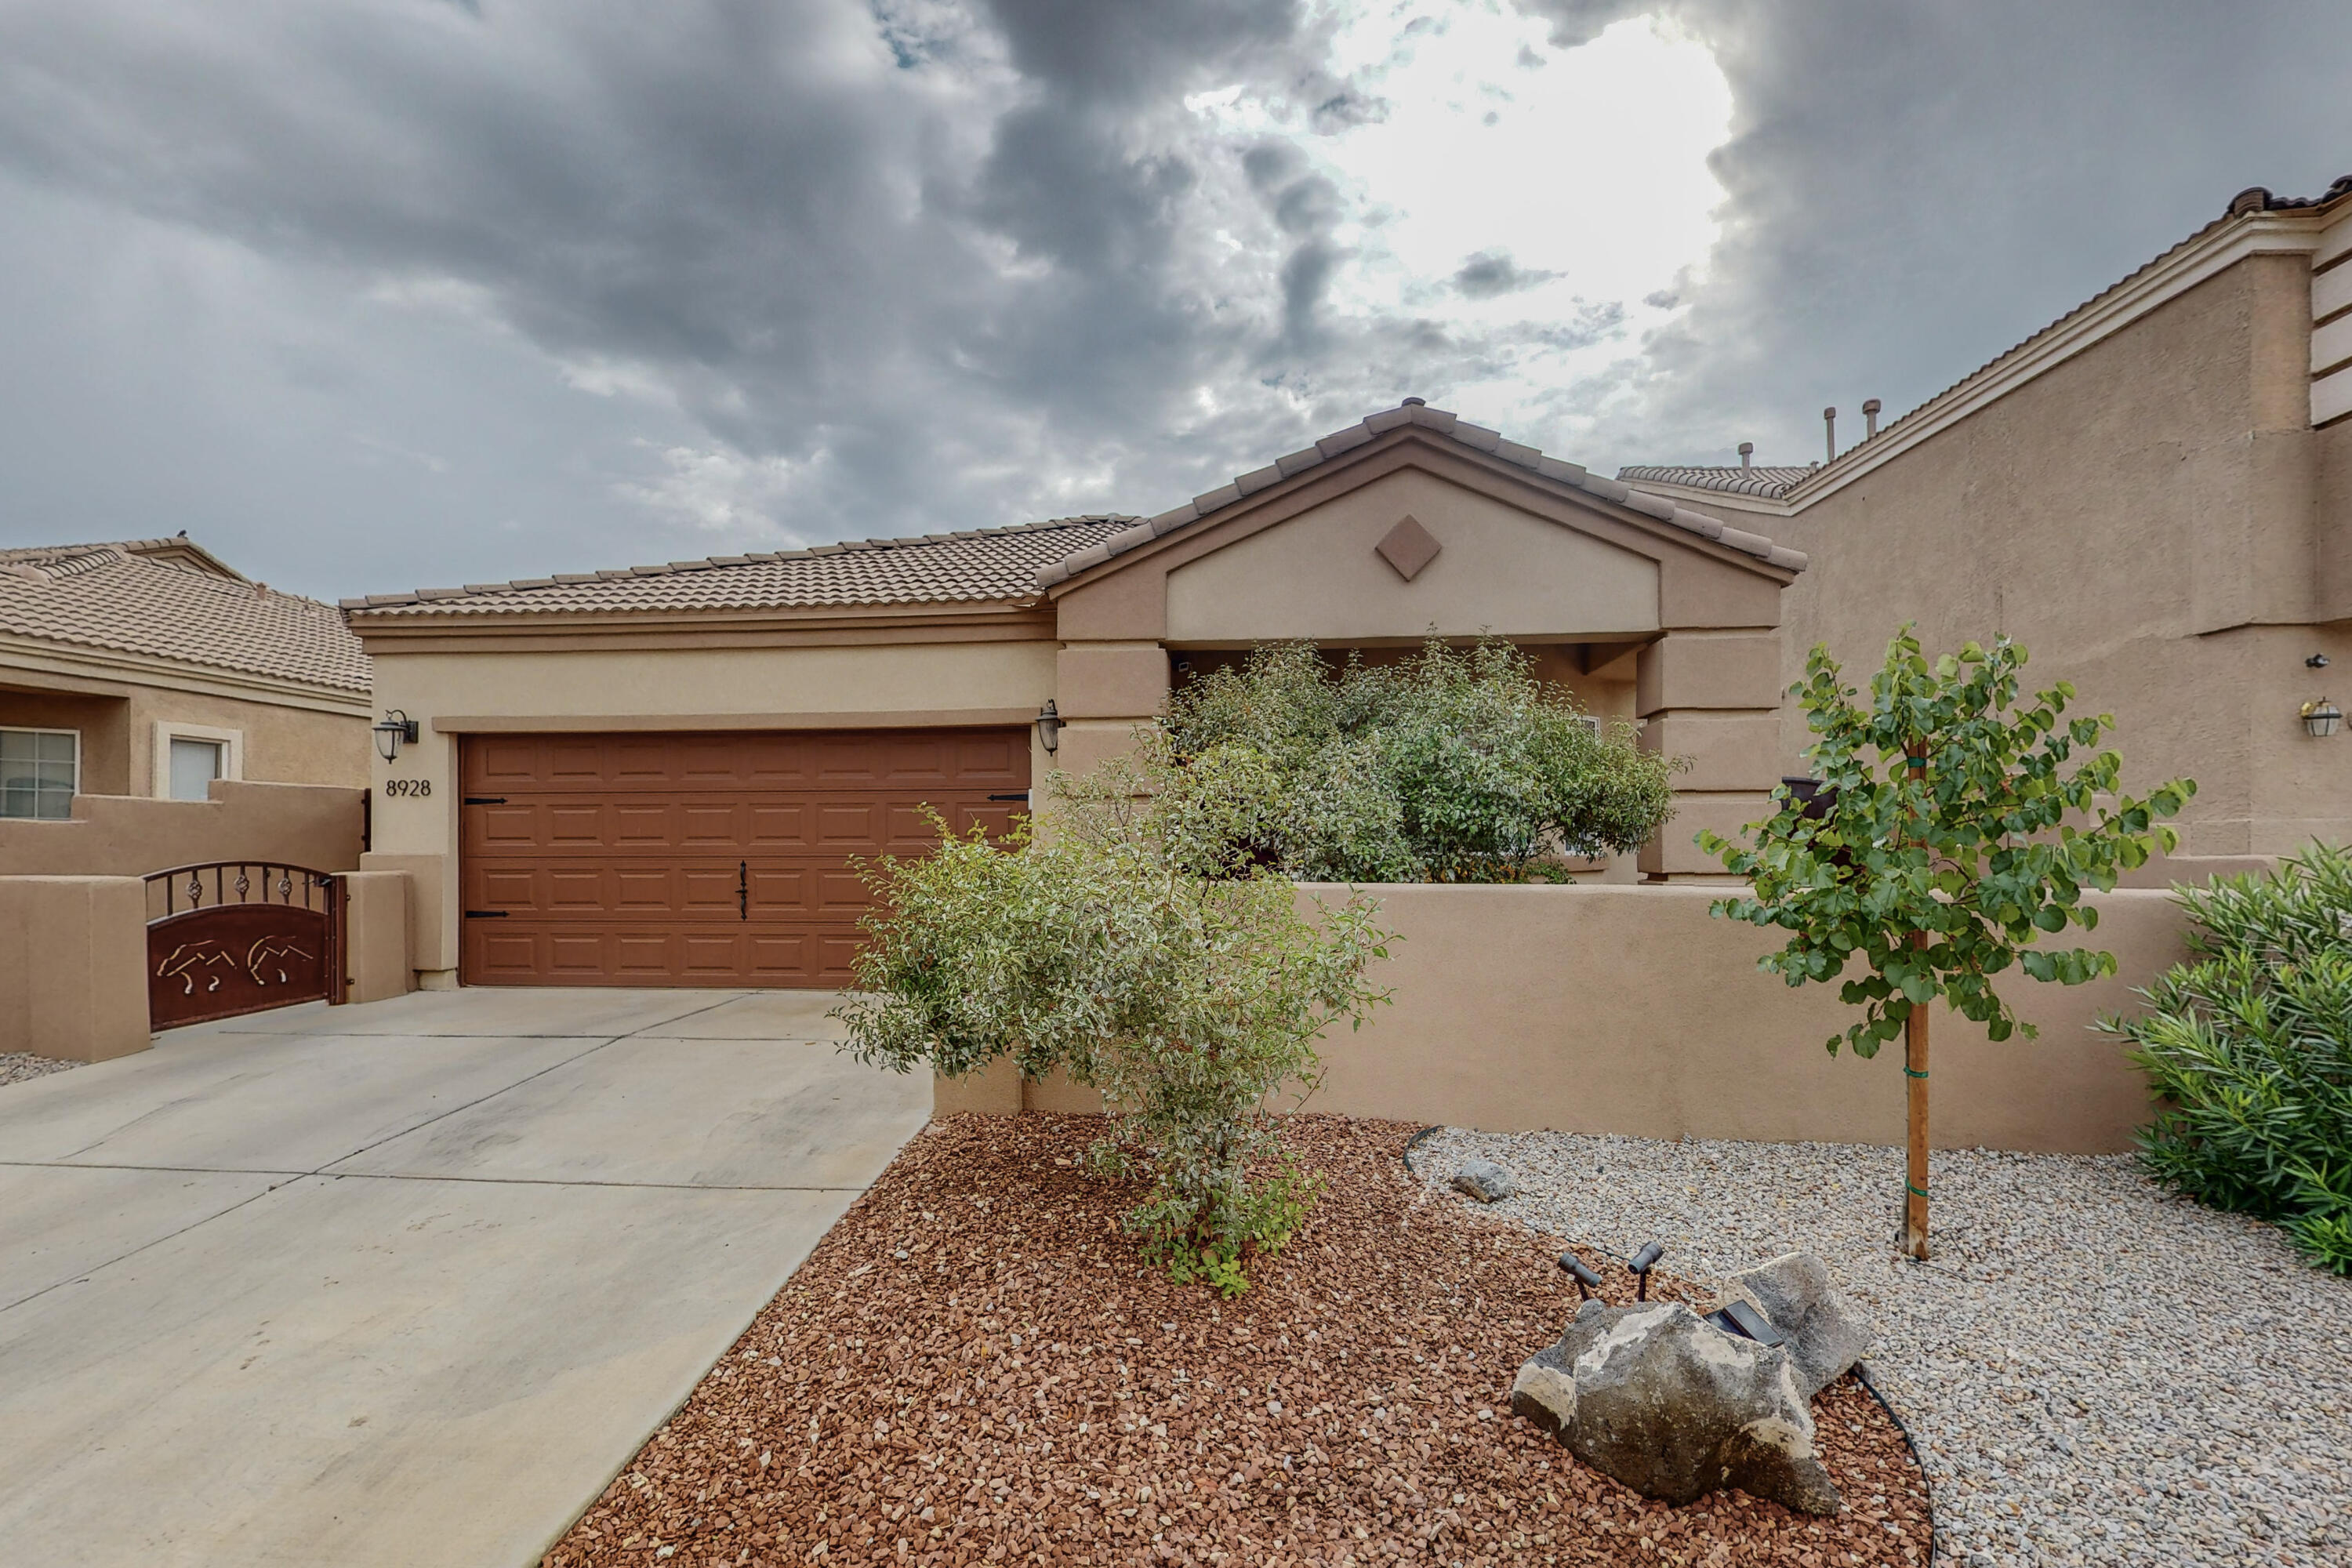 Come see this REMARKABLE, GORGEOUSLY REMODELED HOME located in Santa Fe 2 at the Trails. This Stunning 3 bed/2 full bath has so many upgrades: SELLER OWNED Solar System, New Lennox HVAC System Central Heating/Refrigerated Air (2023) Whole House Synthetic Stucco (2021) Proline Water Heater (2022) The Renovated Kitchen is a Culinary Dream that boasts Granite, Deep Sink, Ducted Range Hood, $8K Blue Star Pro Gas Range, Sold Wood Cabinets w/ open shelving, Instant Hot Water, ECO Water Softener & Reverse Osmosis. Saltillo Tile throughout, Transom Windows, Remodeled Bathrooms, & so much more! Recent Backyard 6ft wall extension to the front w/new courtyard & 4 custom yard gates (2022) Indulge in your private backyard that was professionally landscaped w/ sidewalk extension & custom wood Pergola.